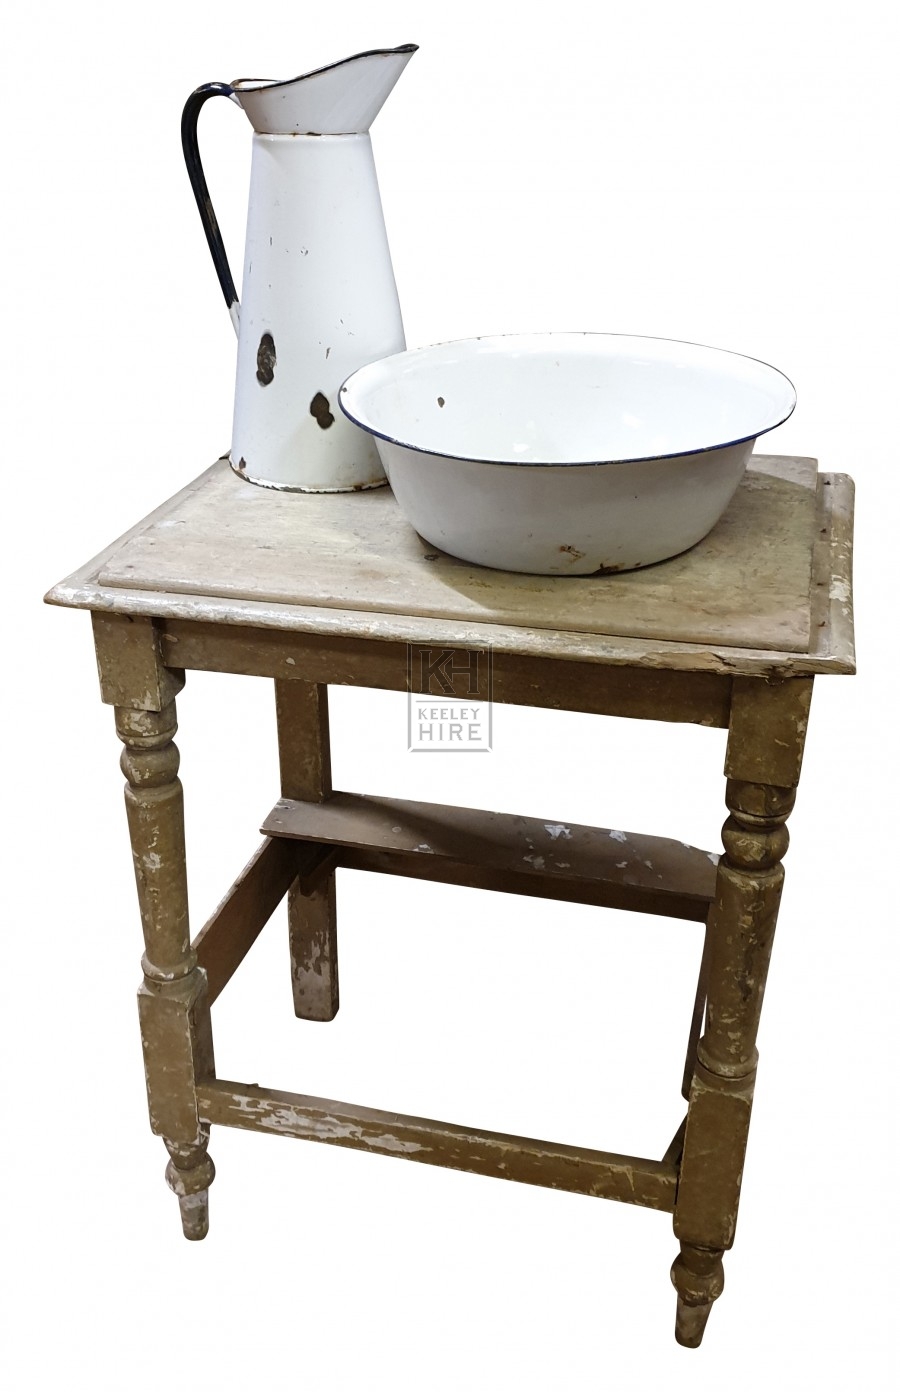 Rough wash stand with bowl & jug